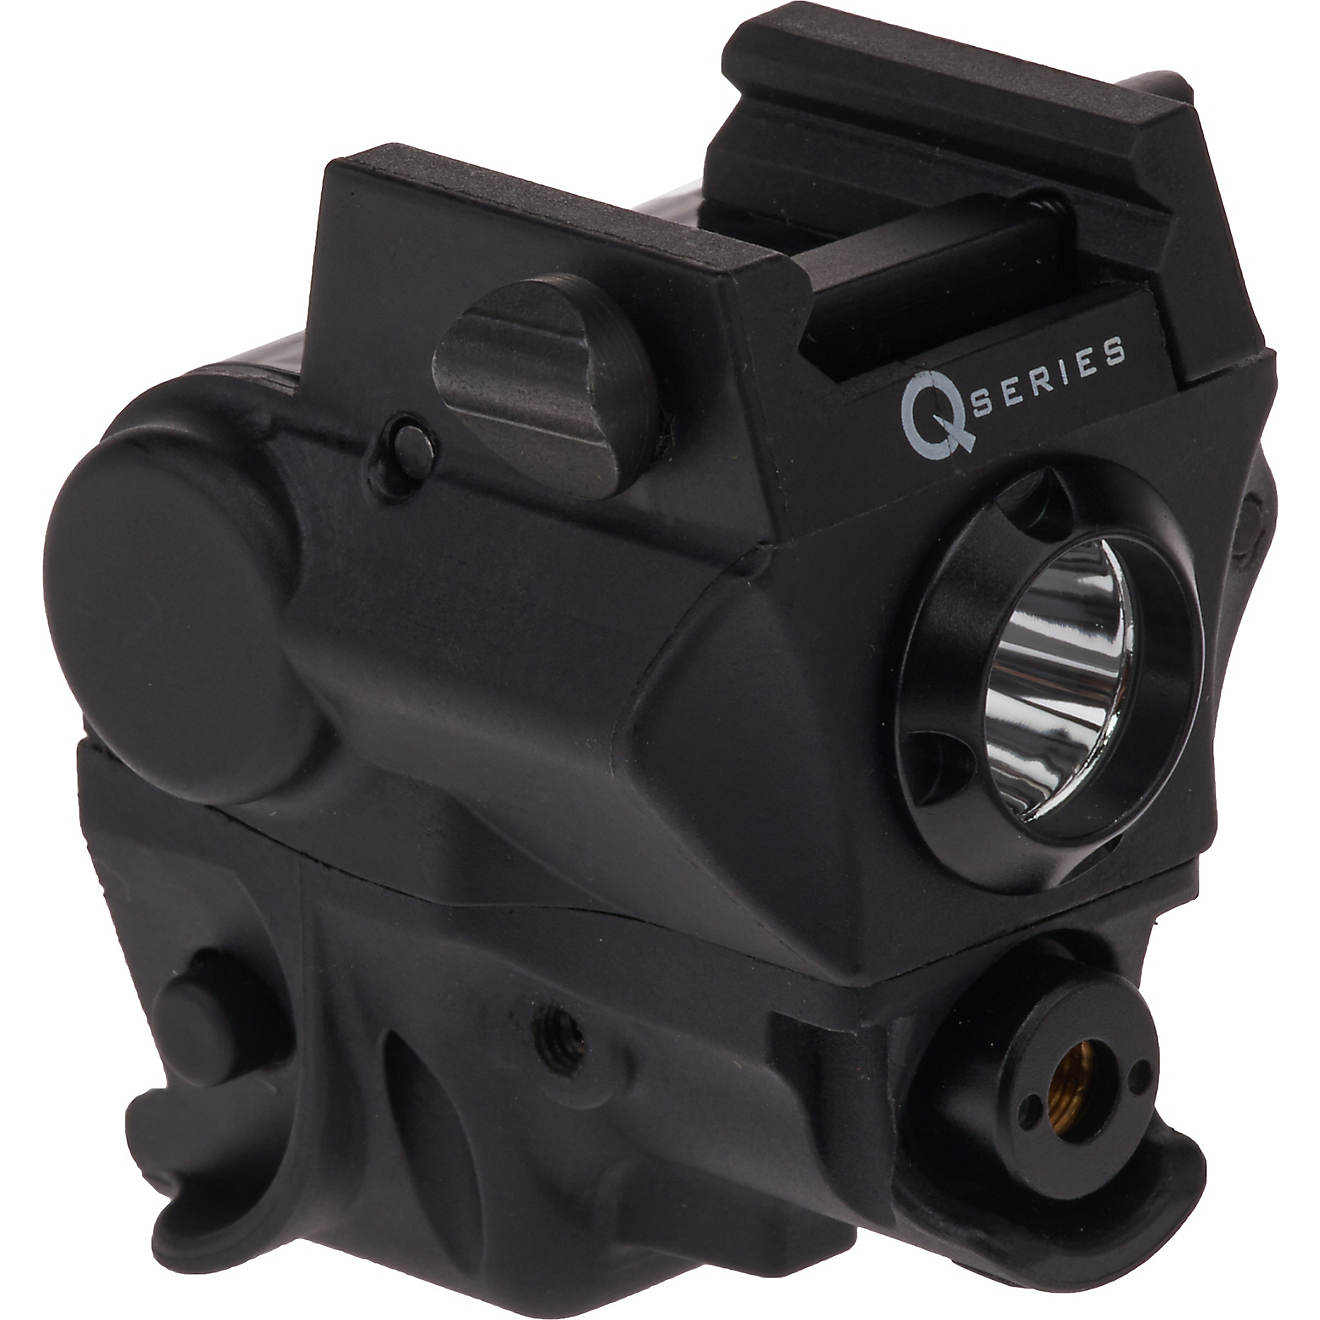 iProtec Q-Series Subcompact Pistol Laser Sight and LED Light Combo                                                               - view number 1